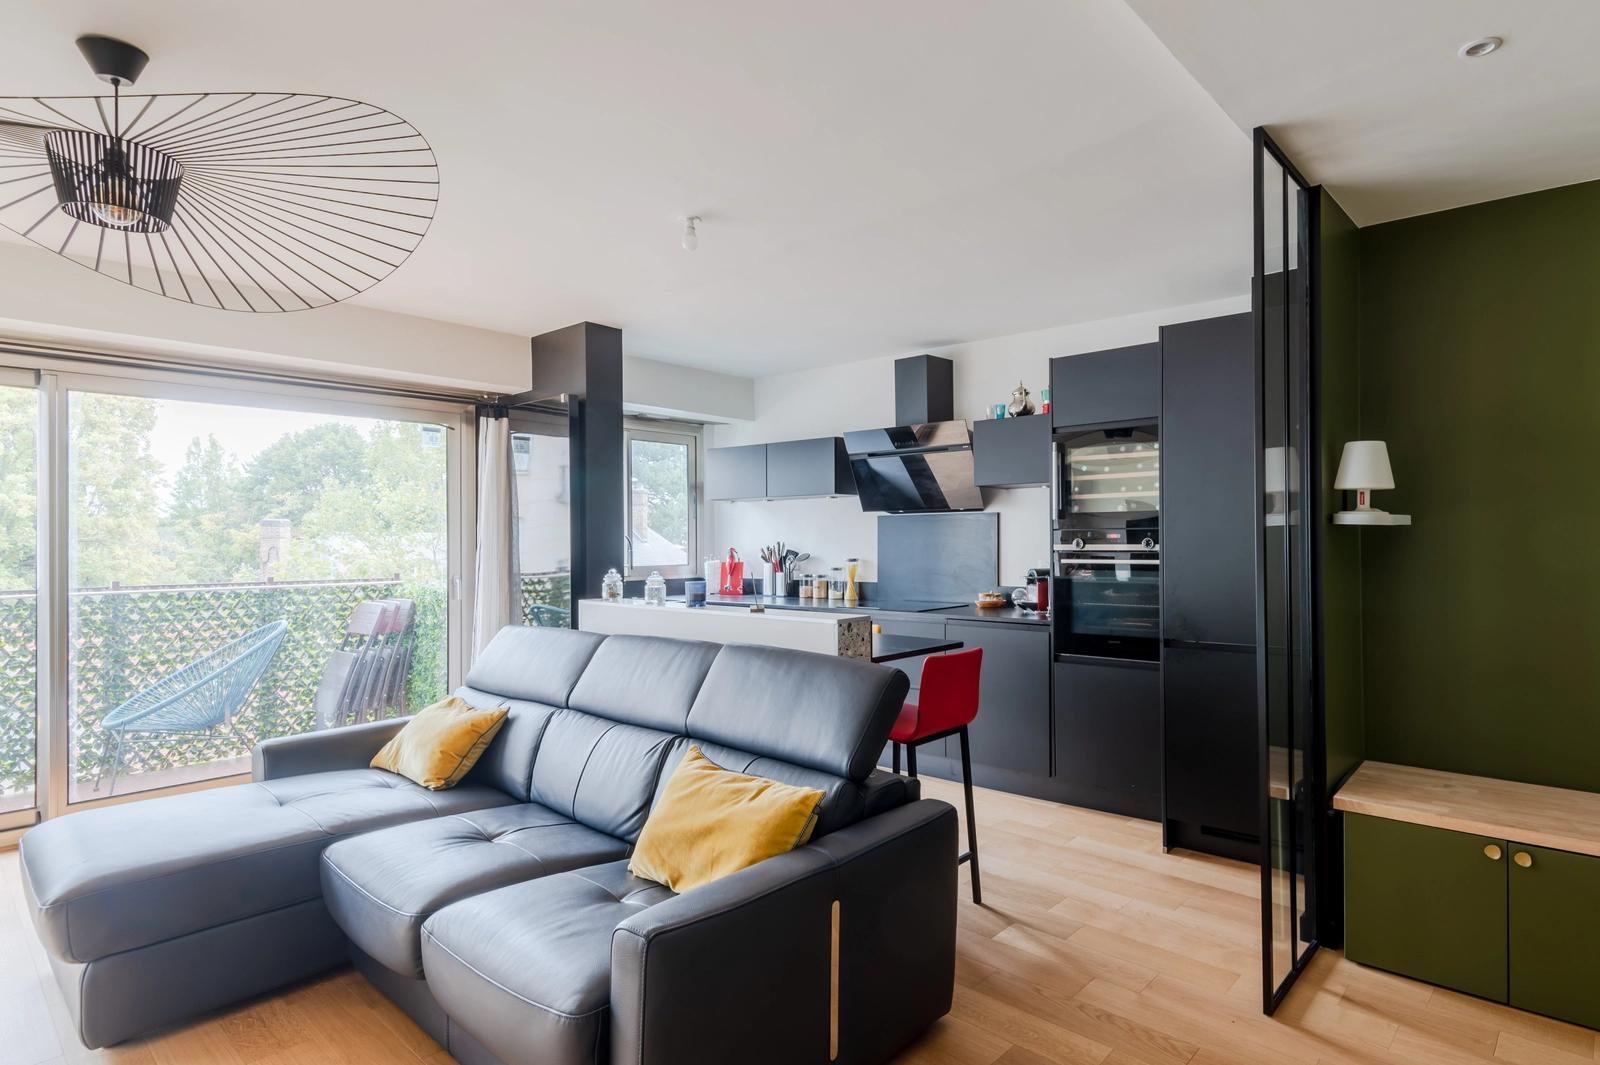 Space Beautiful contemporary apartment - Village Montreuil - 5